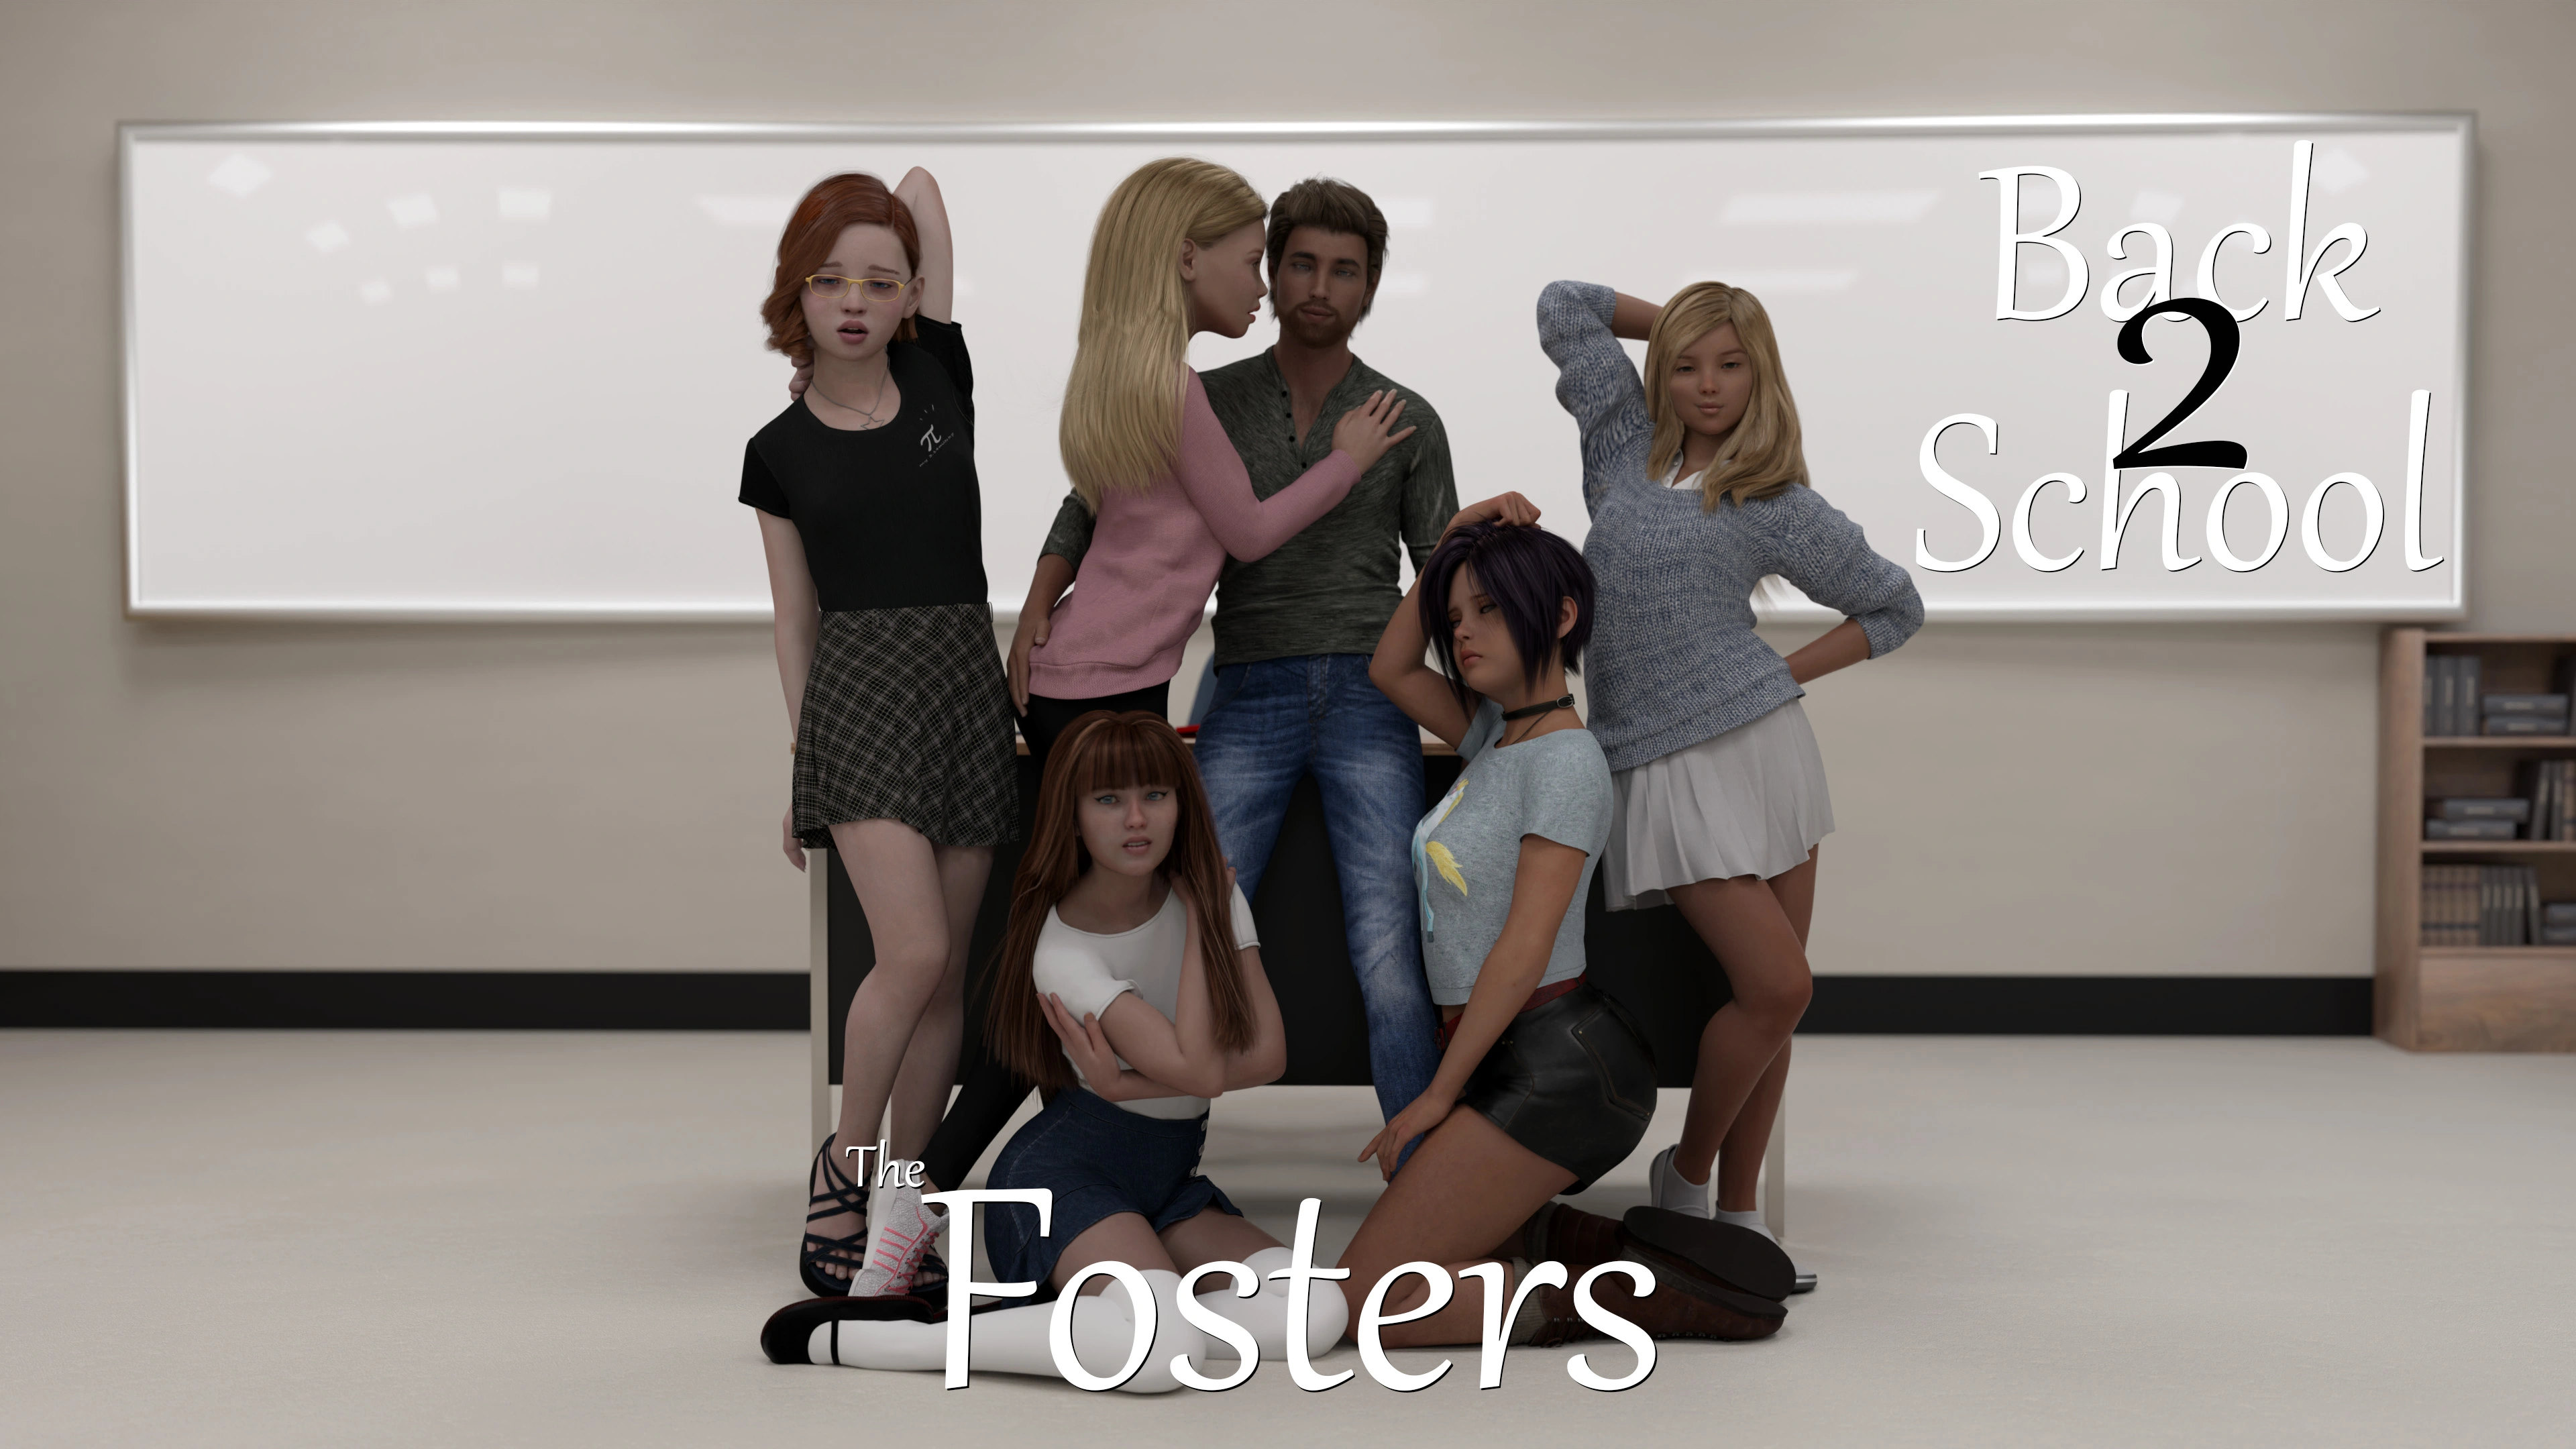 The Fosters: Back 2 School main image